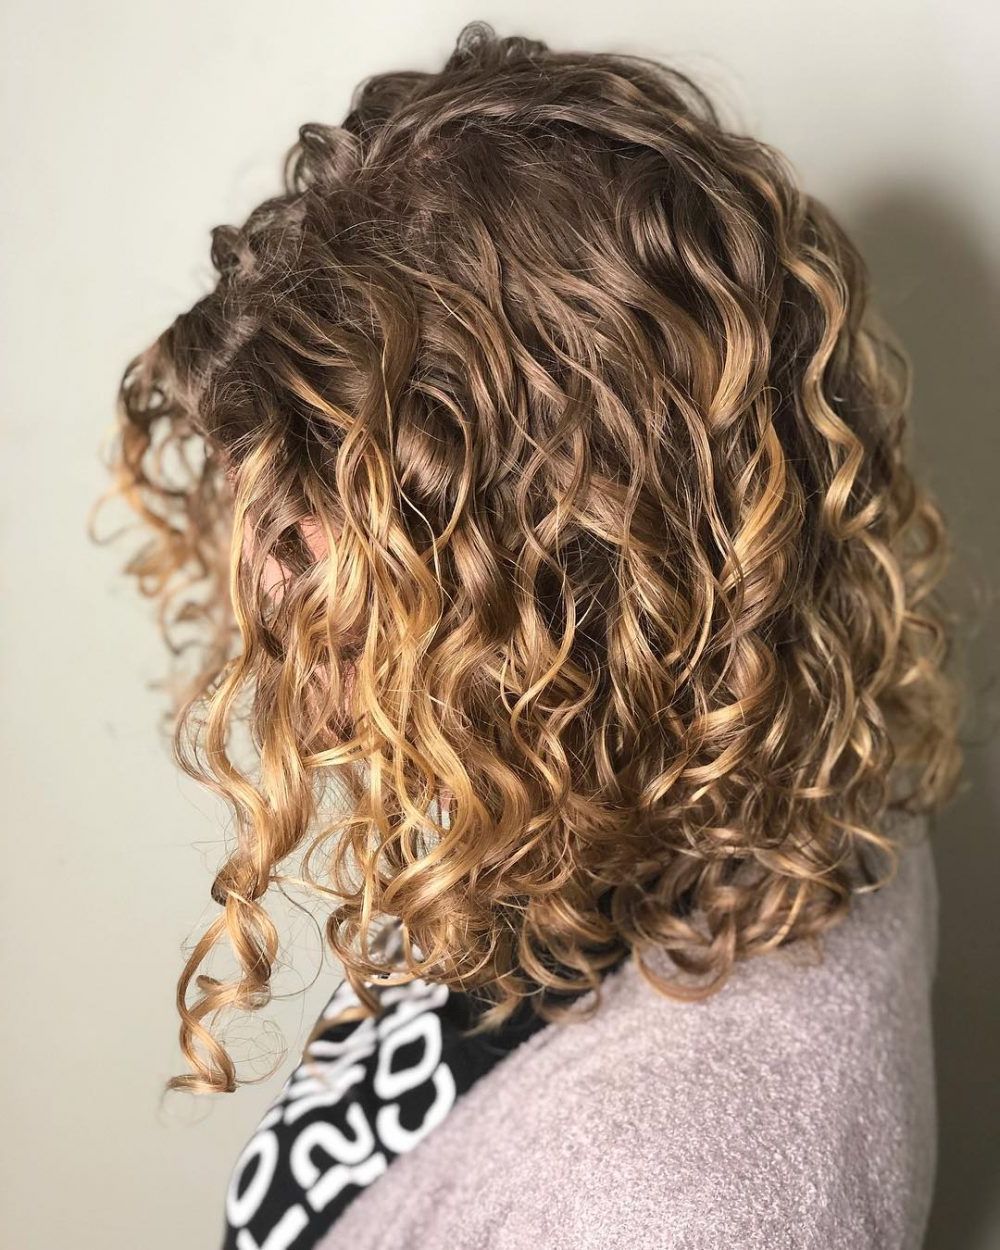 30 Gorgeous Medium Length Curly Hairstyles For Women In 2018 Within Scrunched Curly Brunette Bob Hairstyles (View 11 of 25)